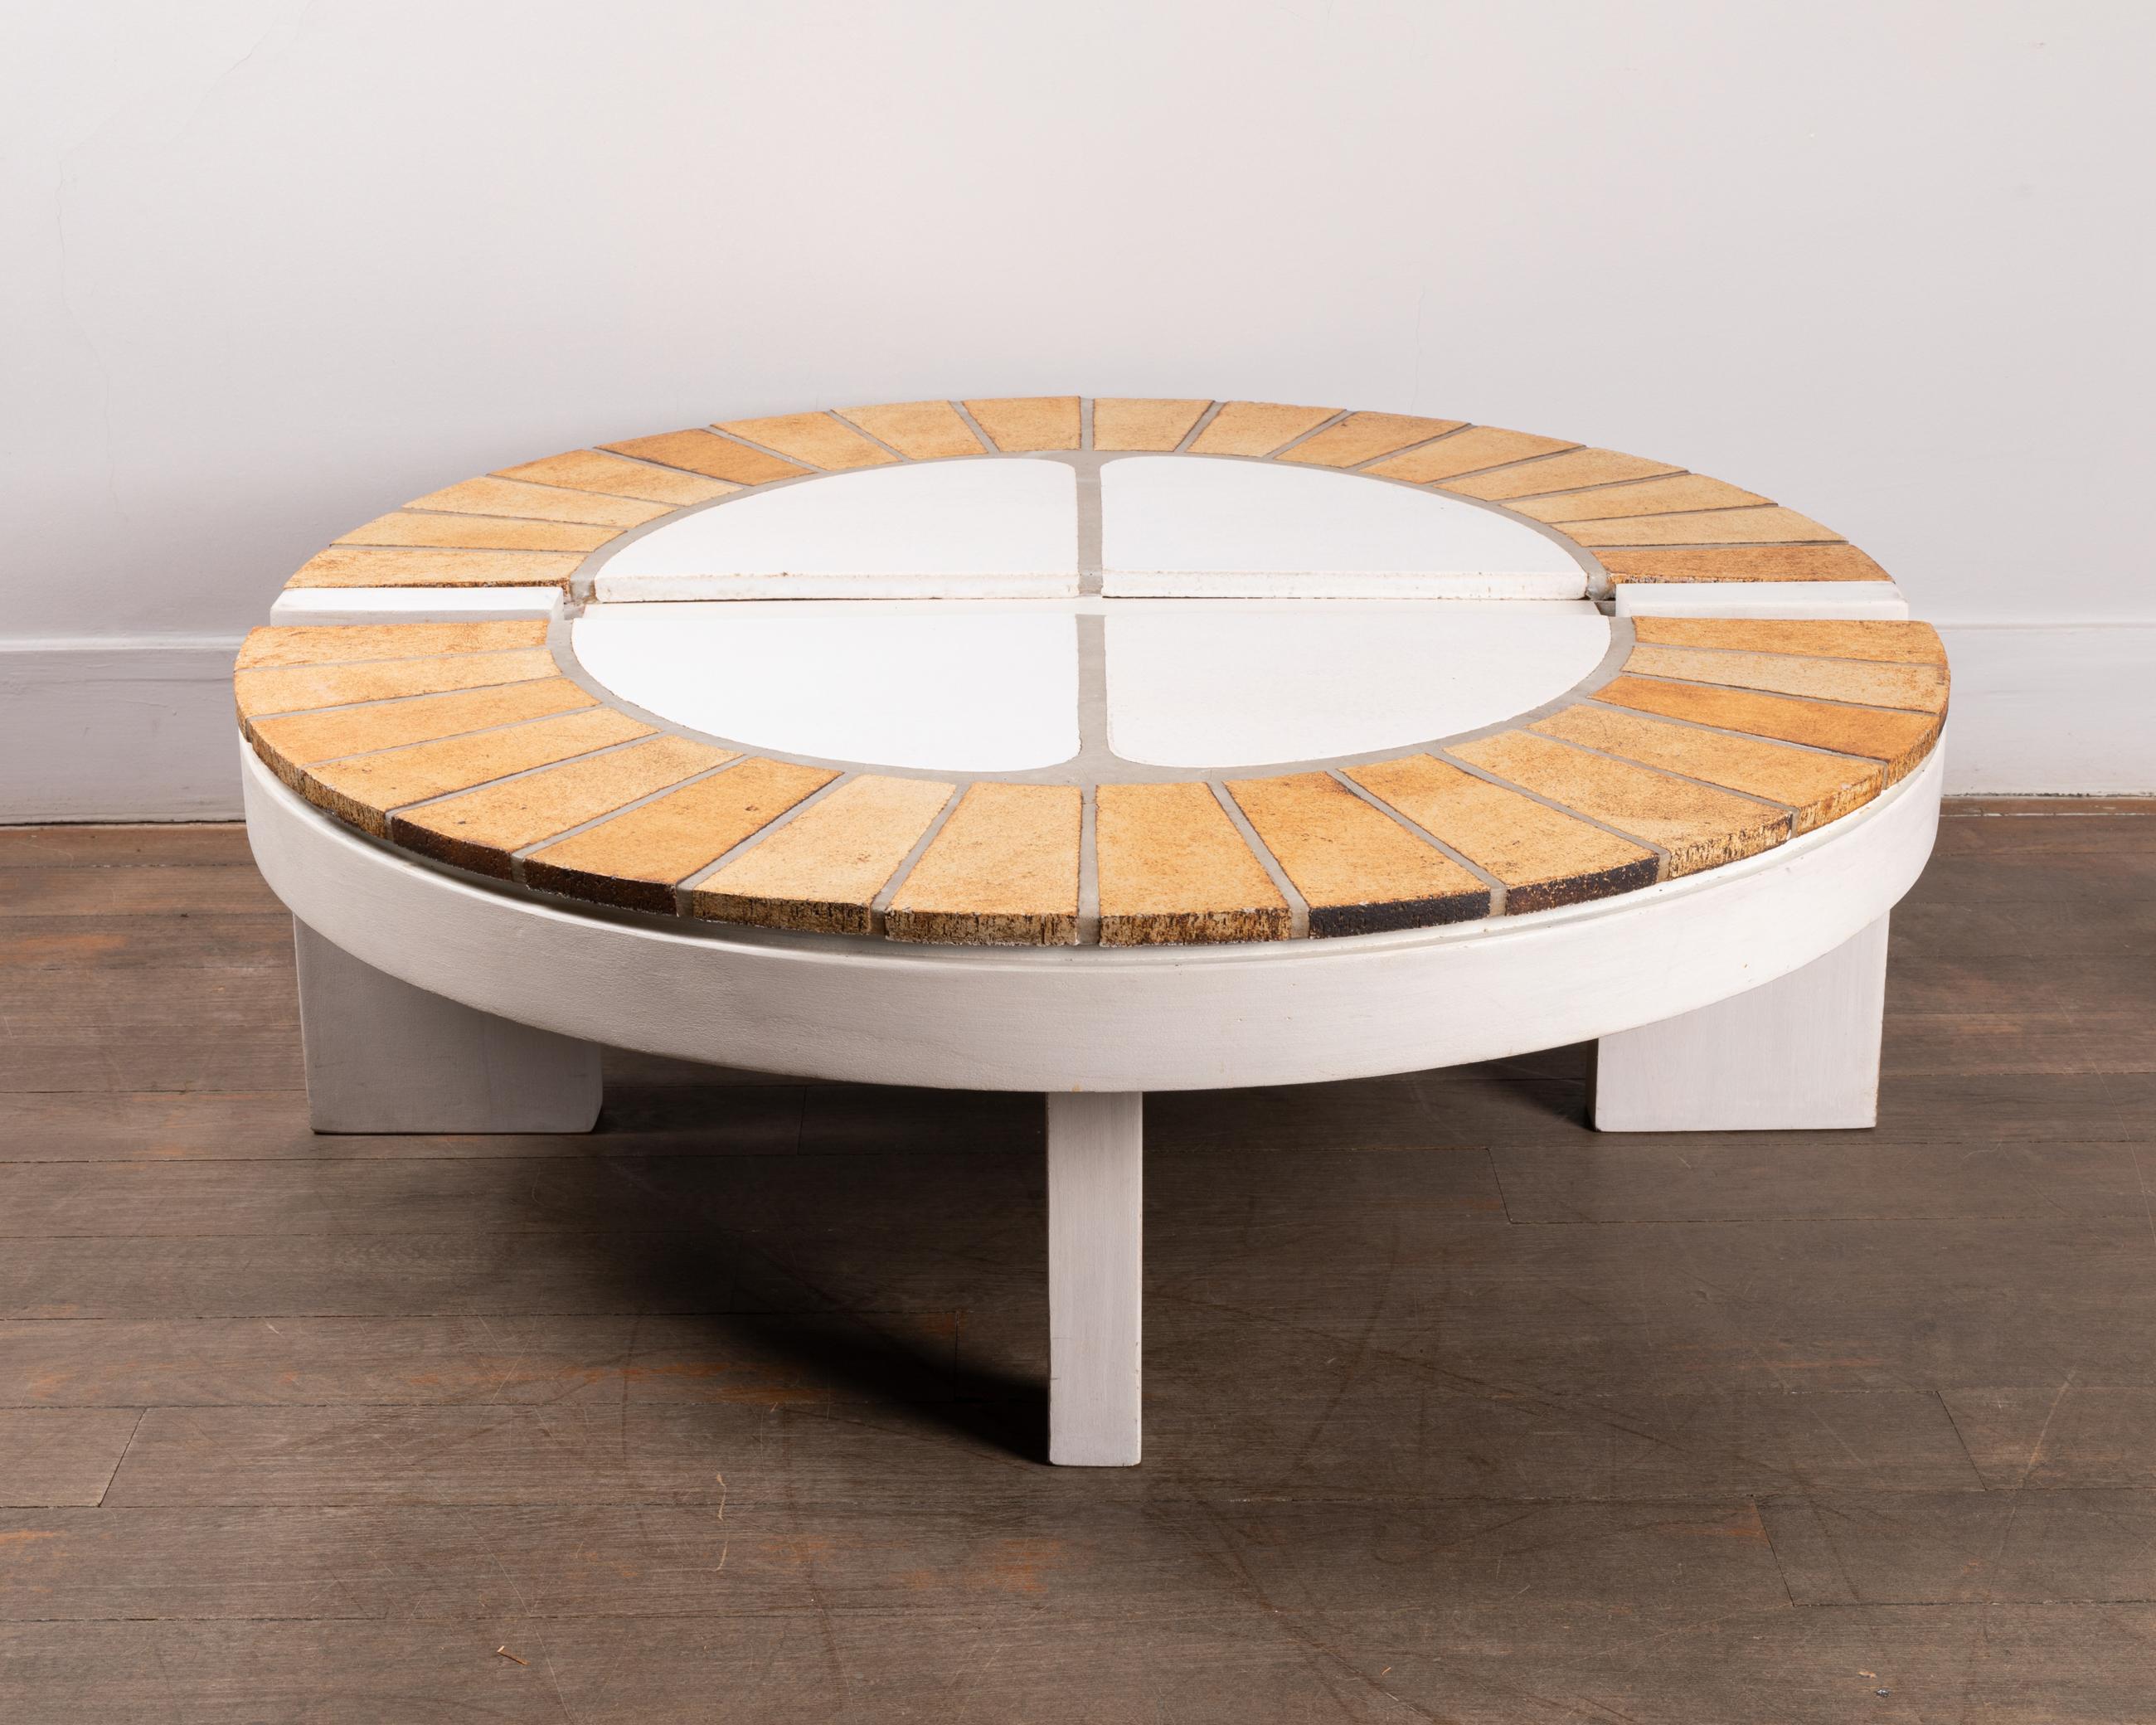 Painted Oval Ceramic Coffee Table by Roger Capron, Vallauris, 1960's